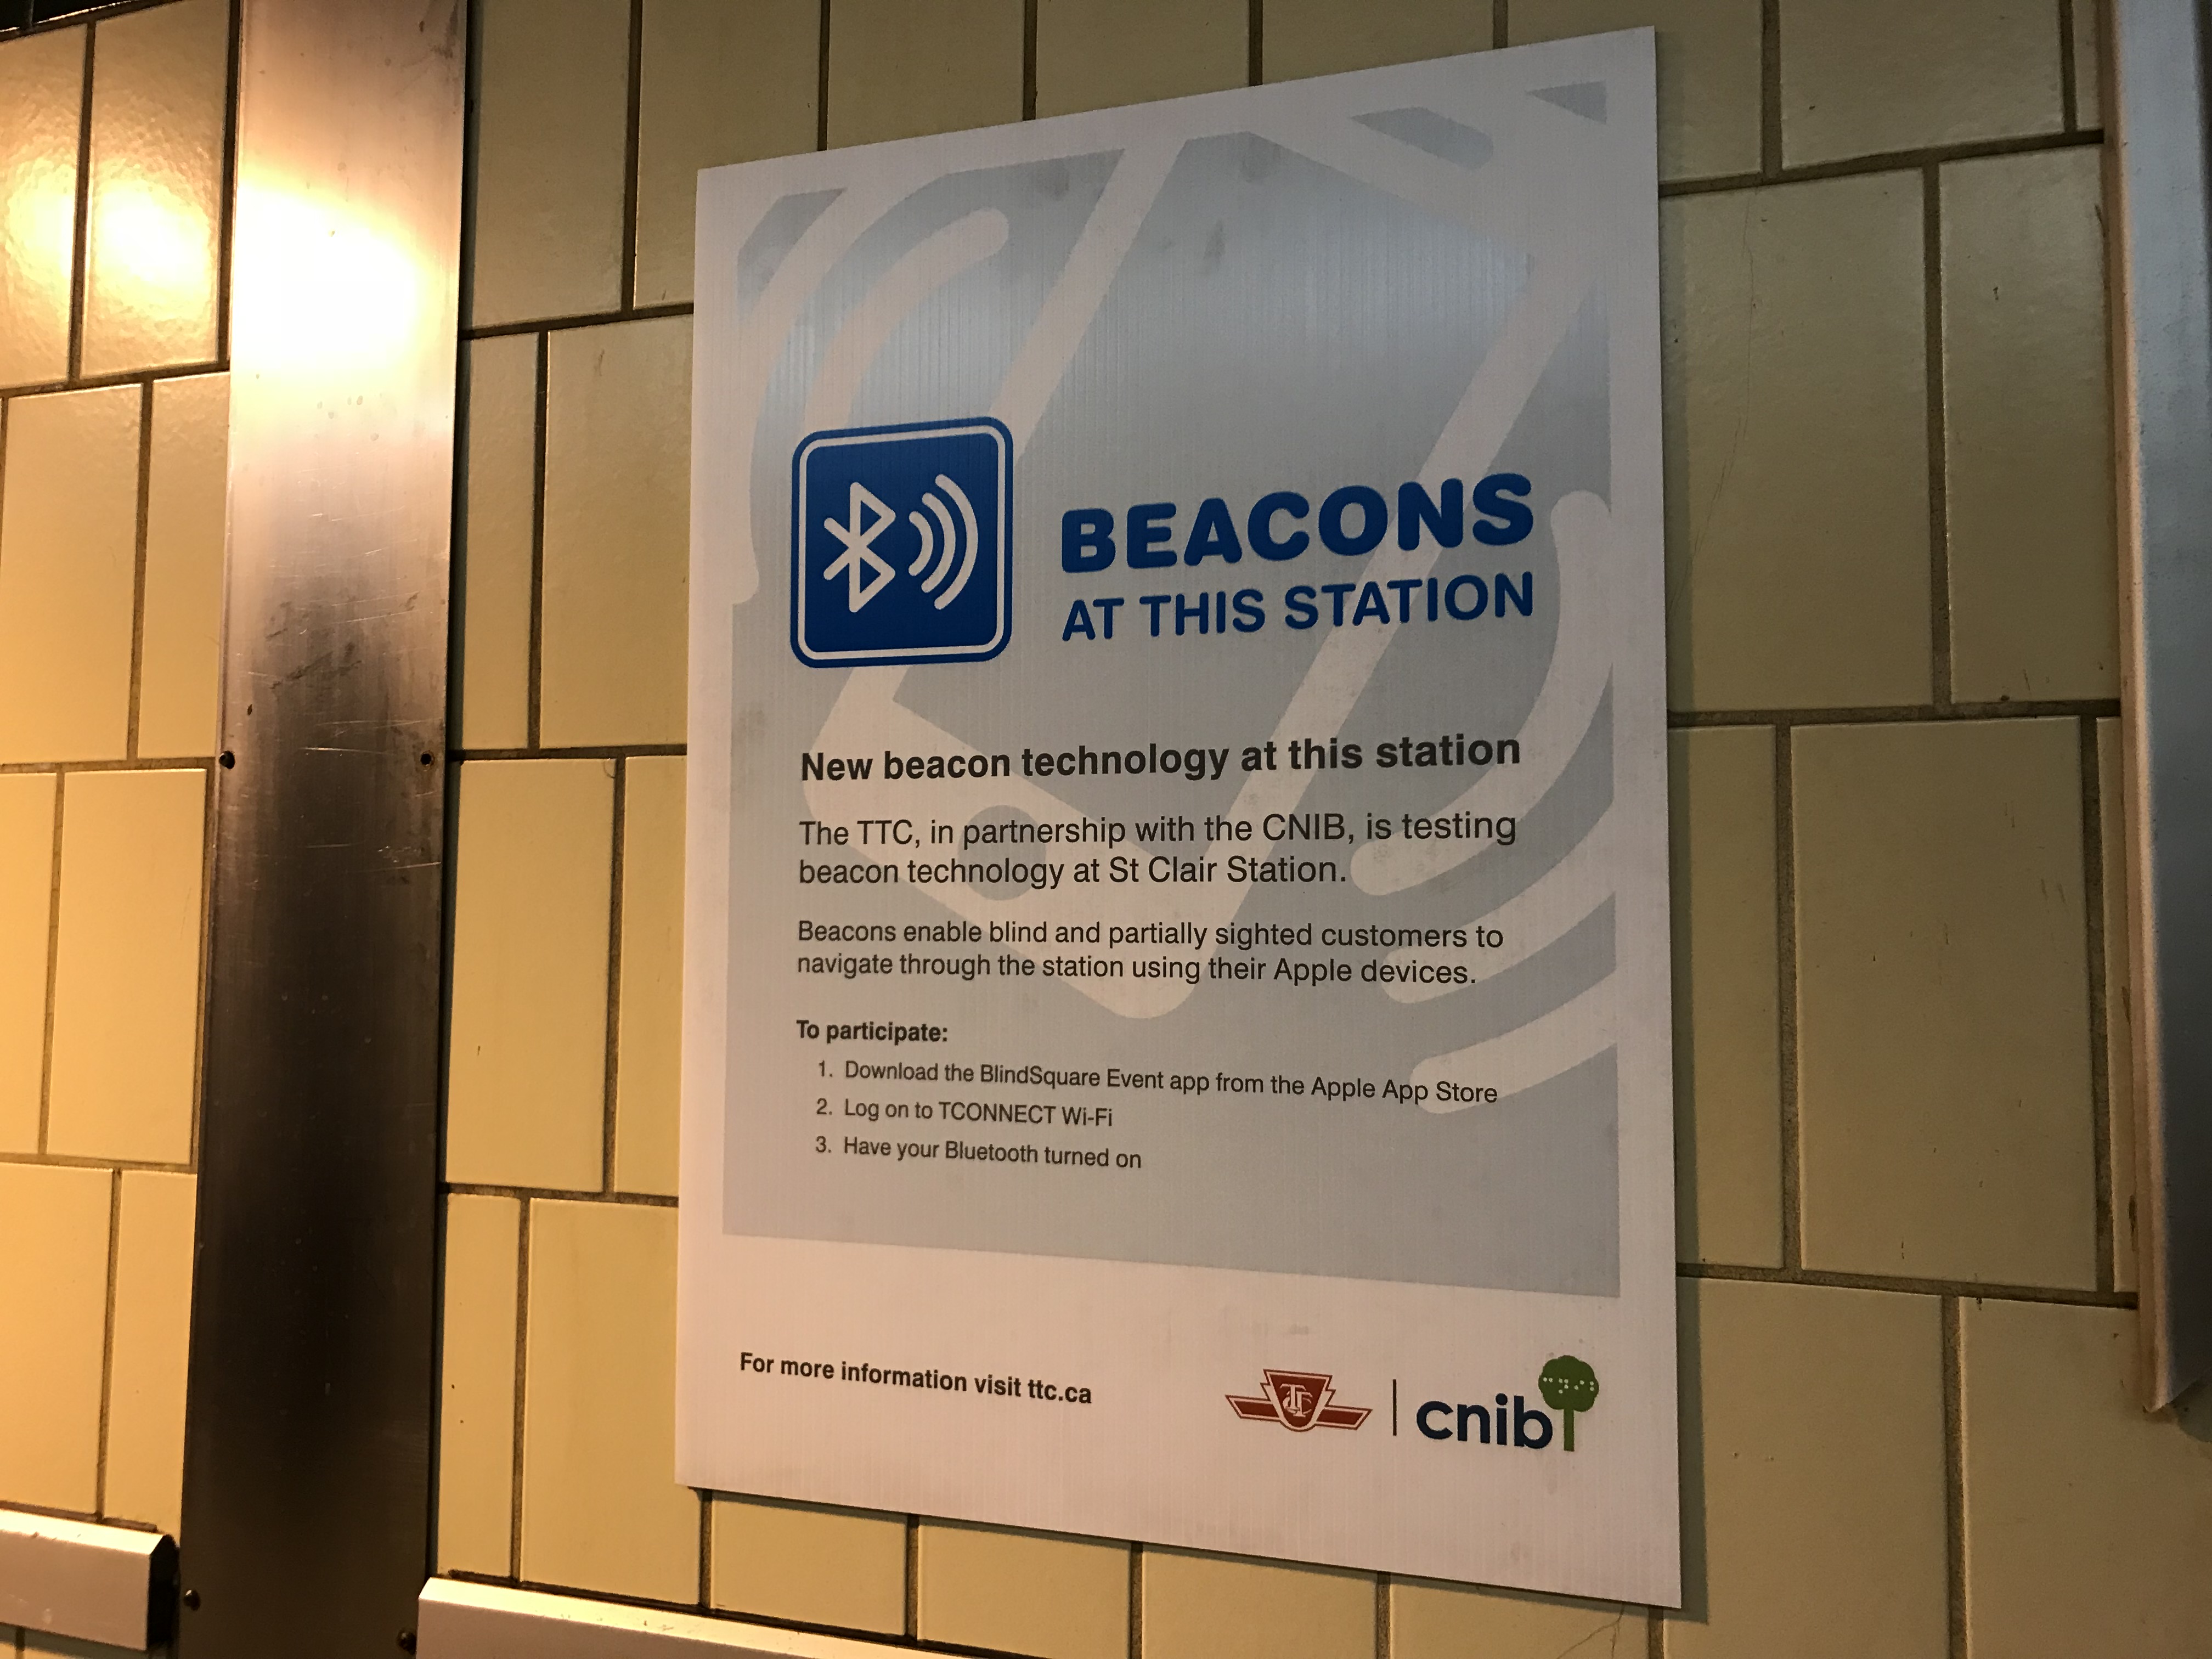 A poster at St. Clair station, mentioning the availability of beacon technology at this station, and instructions to use it.